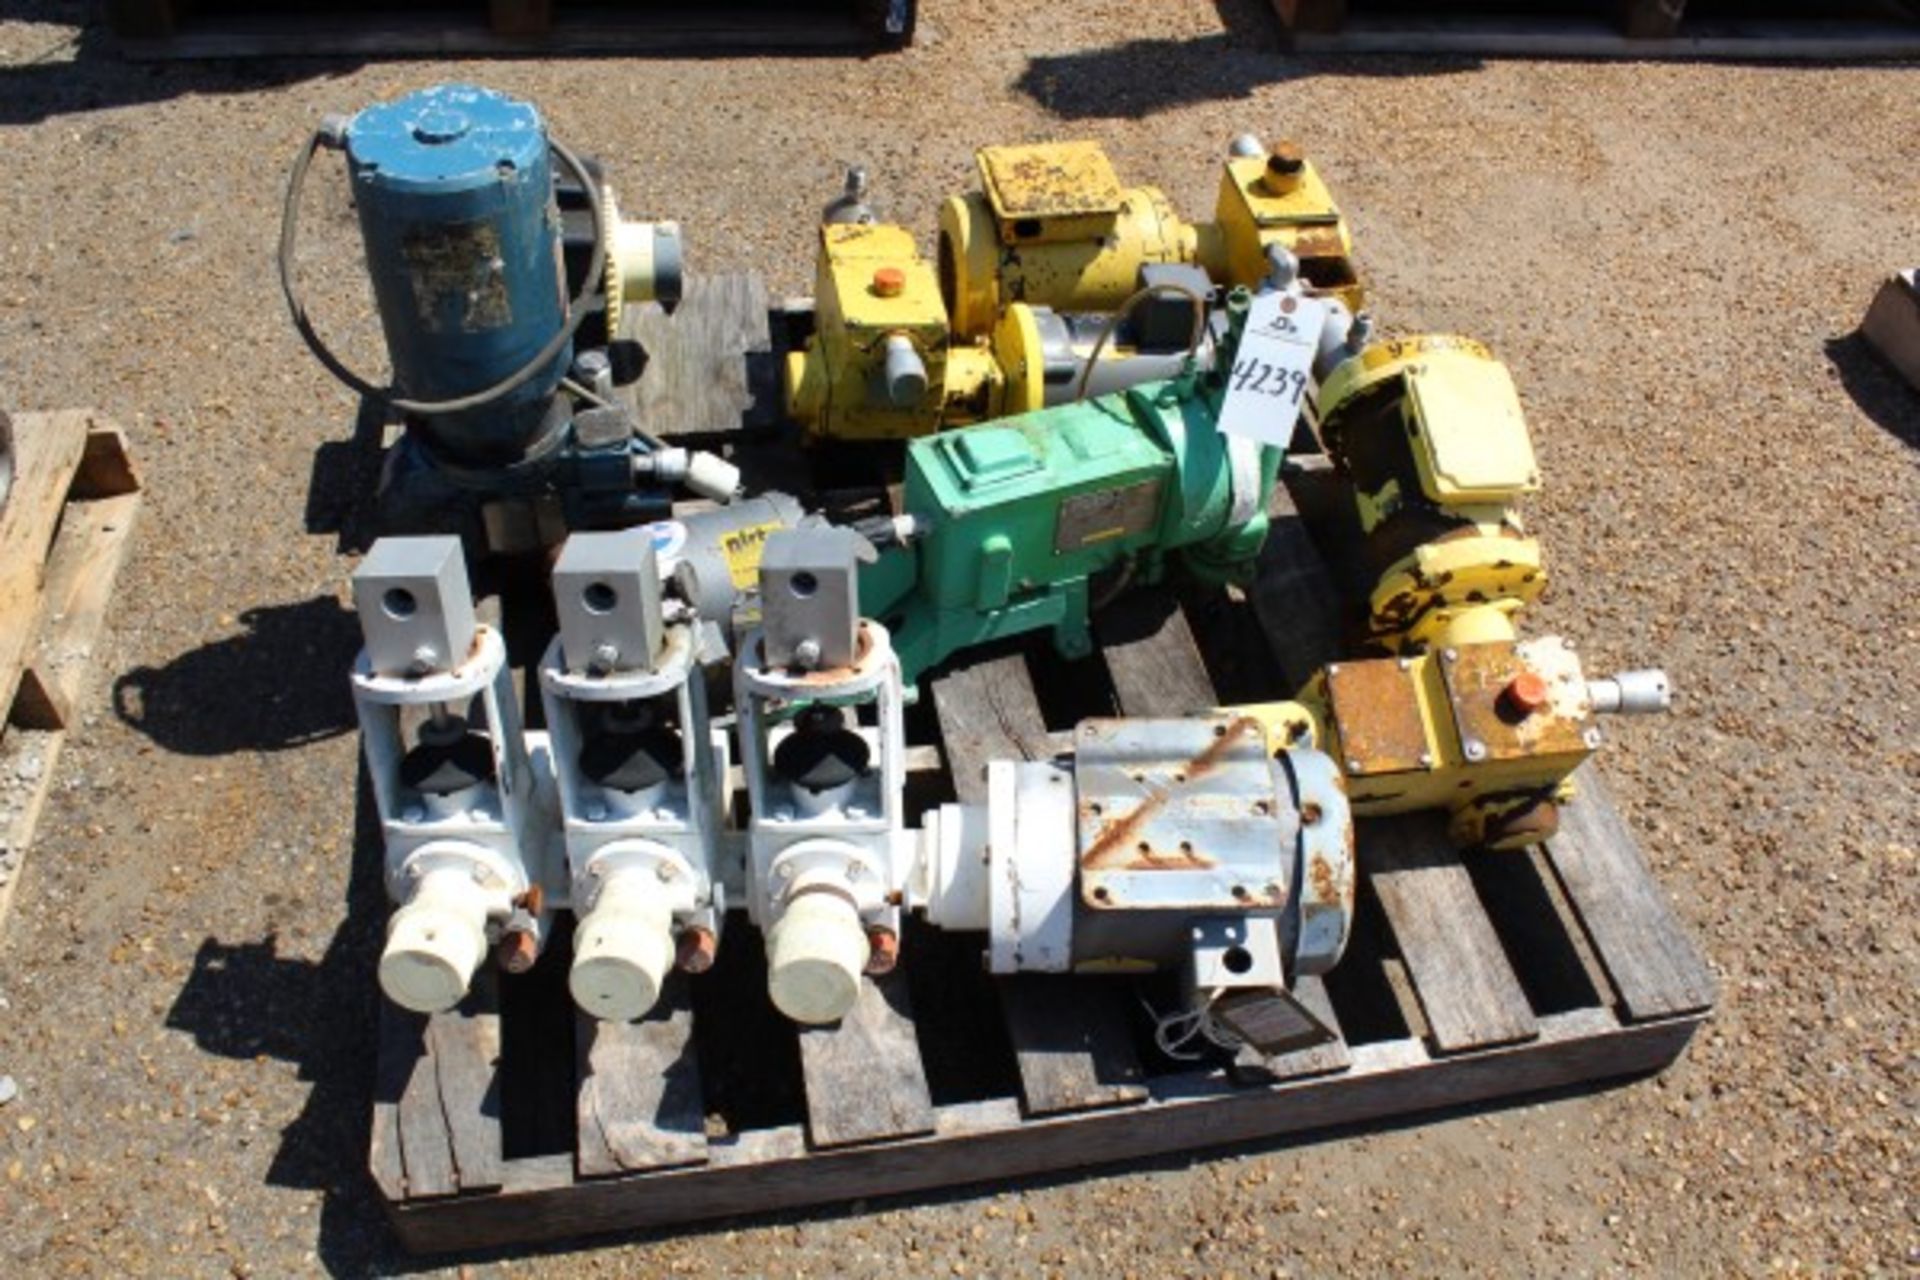 Pallet Lot Pumps | Seller to load for $10 per lot or buyers may remove hand carry items by